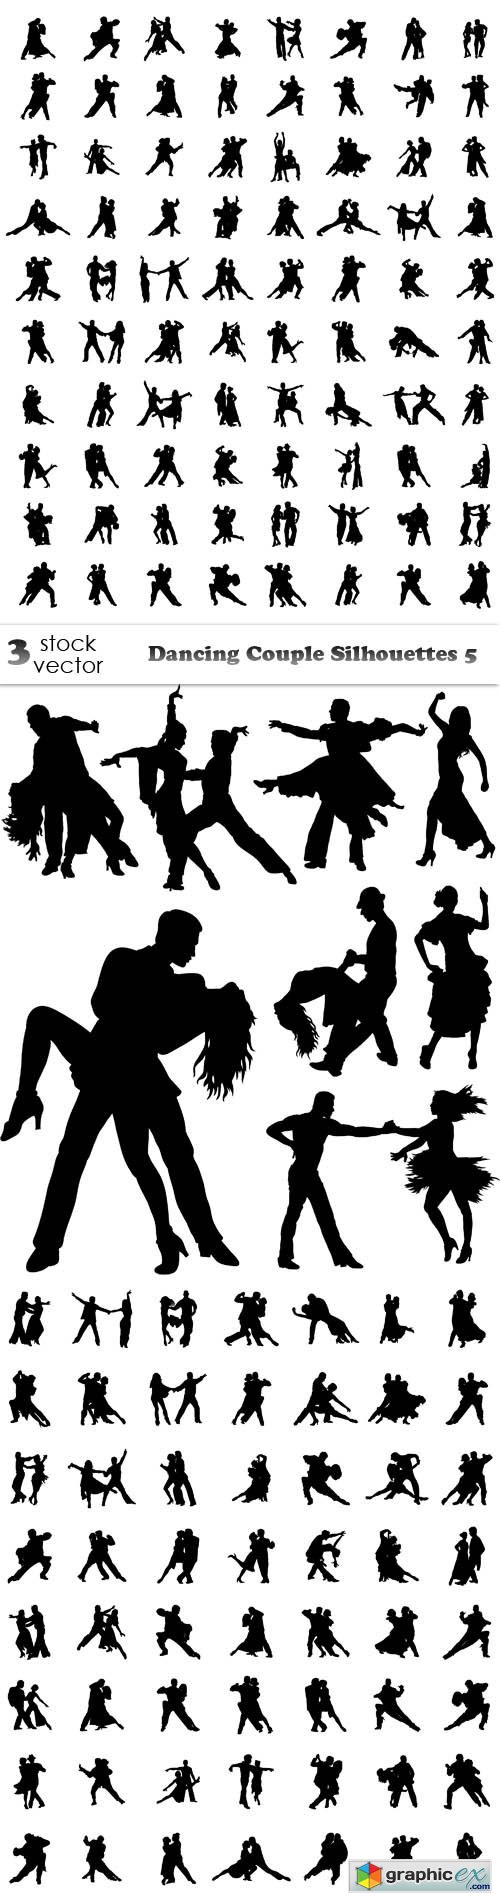 Dancing Couple Silhouettes 5